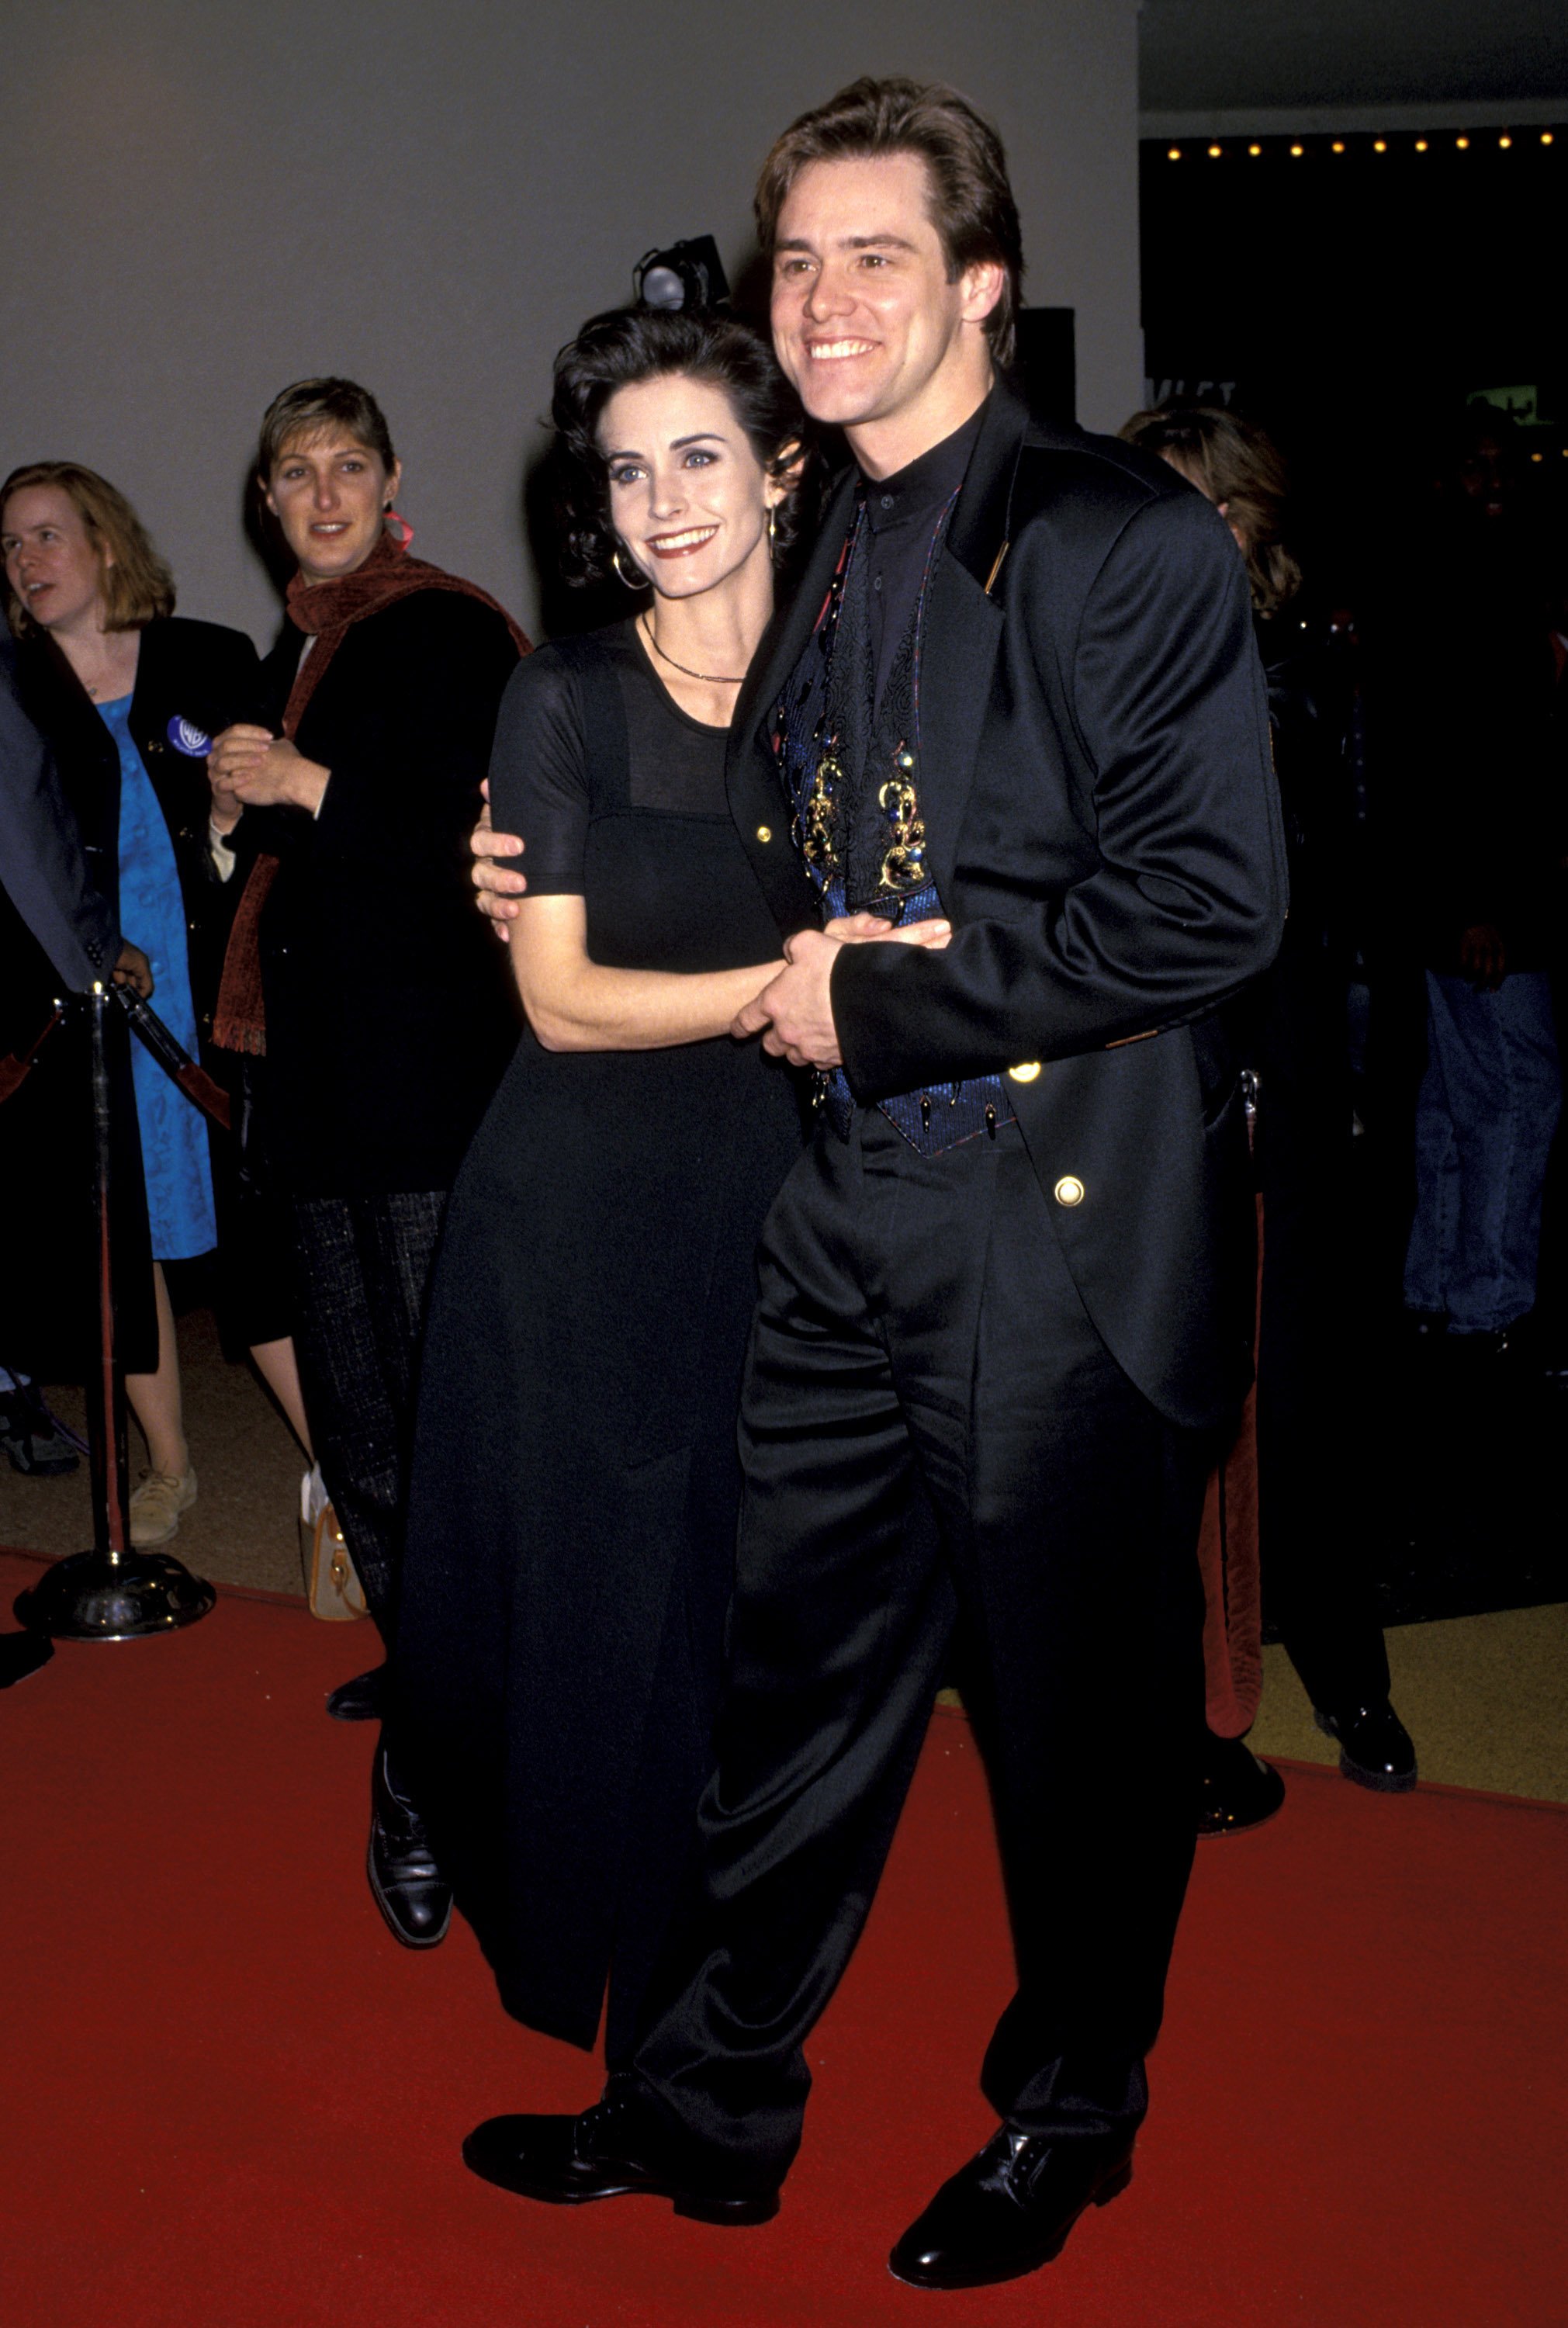 Courteney Cox and Jim Carrey hold hands at the Ace Ventura premiere